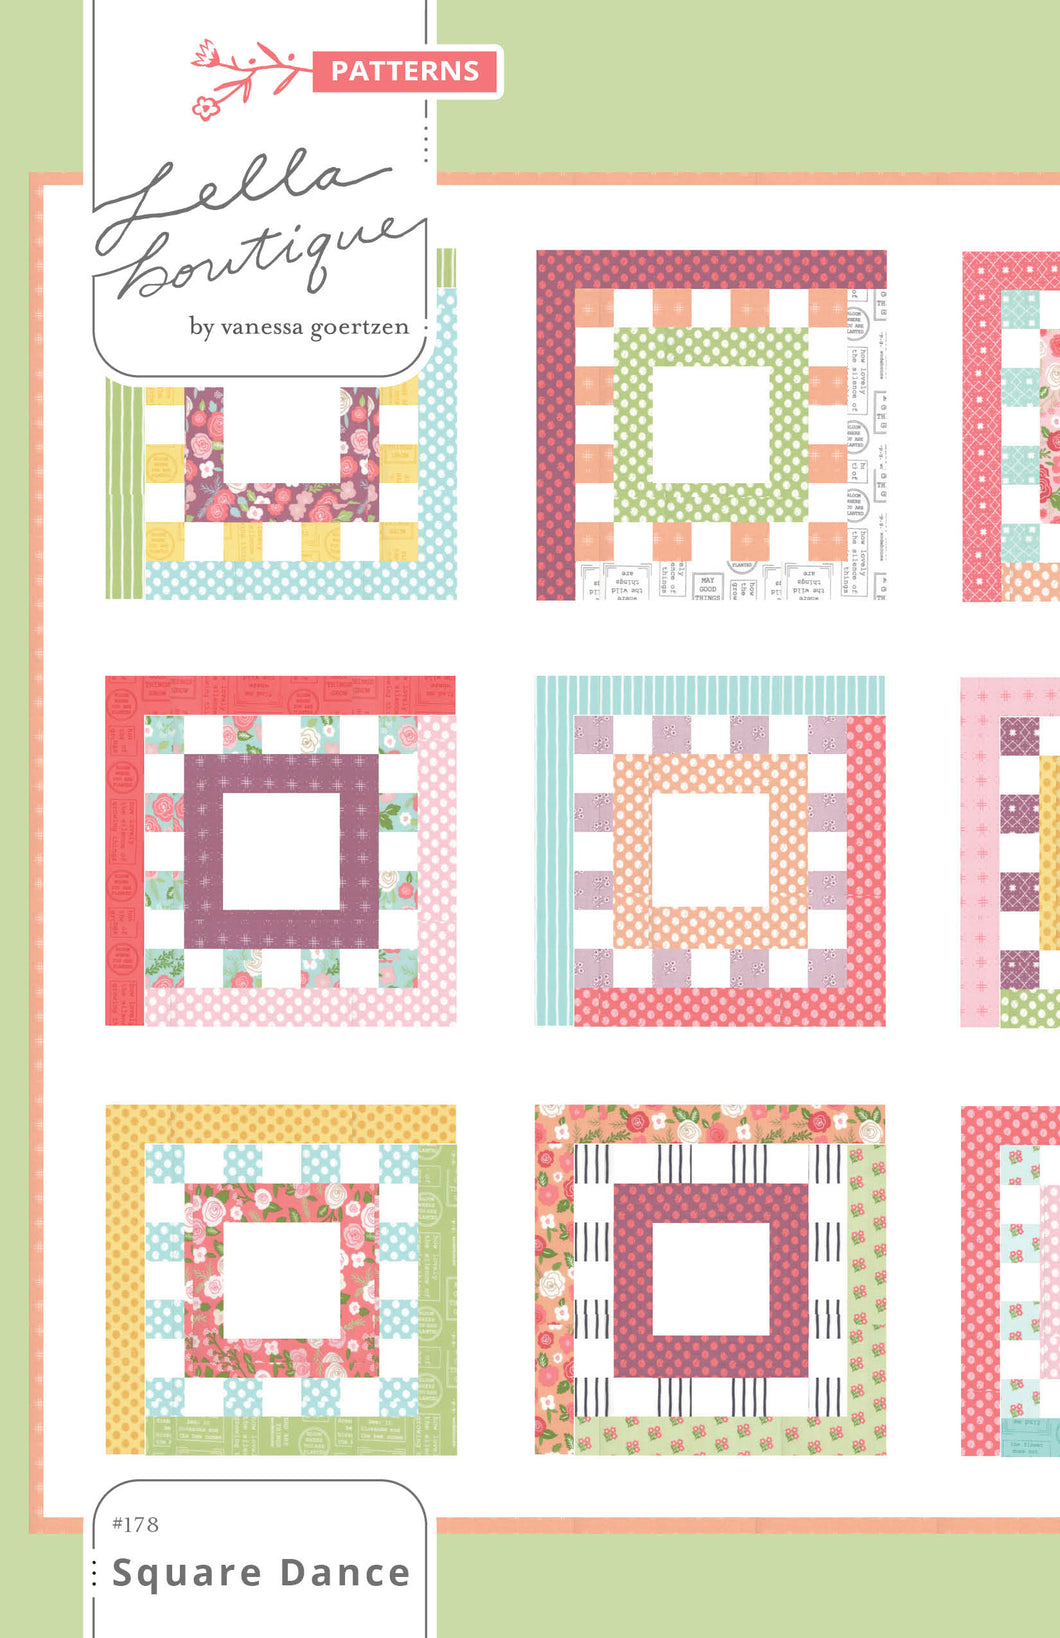 Square Dance striped square quilt blocks from Lella Boutique. Jelly Roll quilt made in Lollipop Garden fabric by Lella Boutique for Moda Fabrics. Download the PDF here.